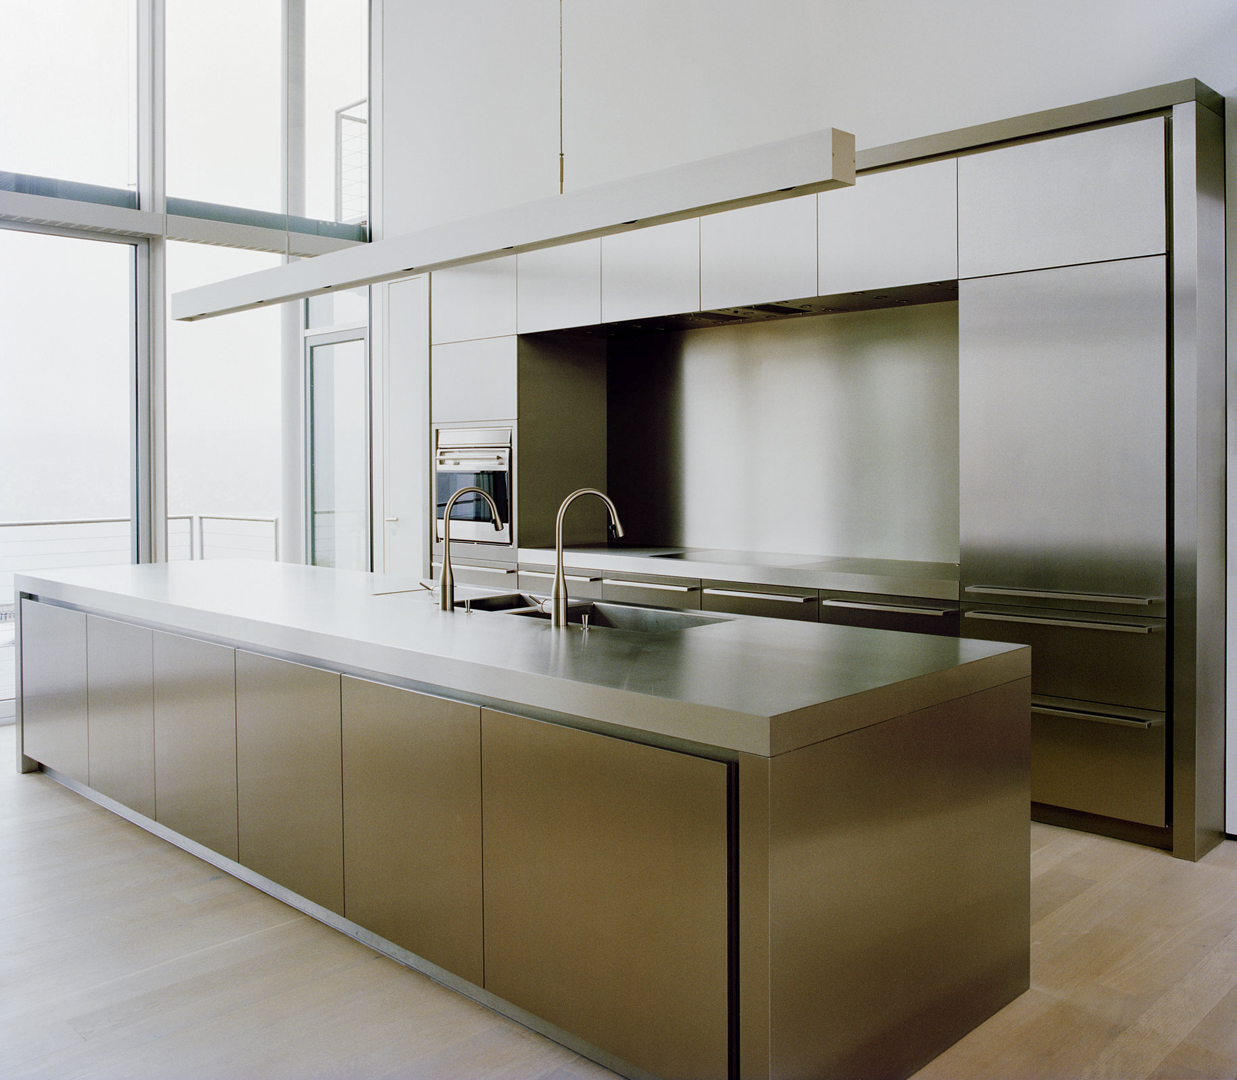 Strato_design_Non Plus Ultra_bespoke kitchen project in Zuerich_mat stainless steel_M1_2008